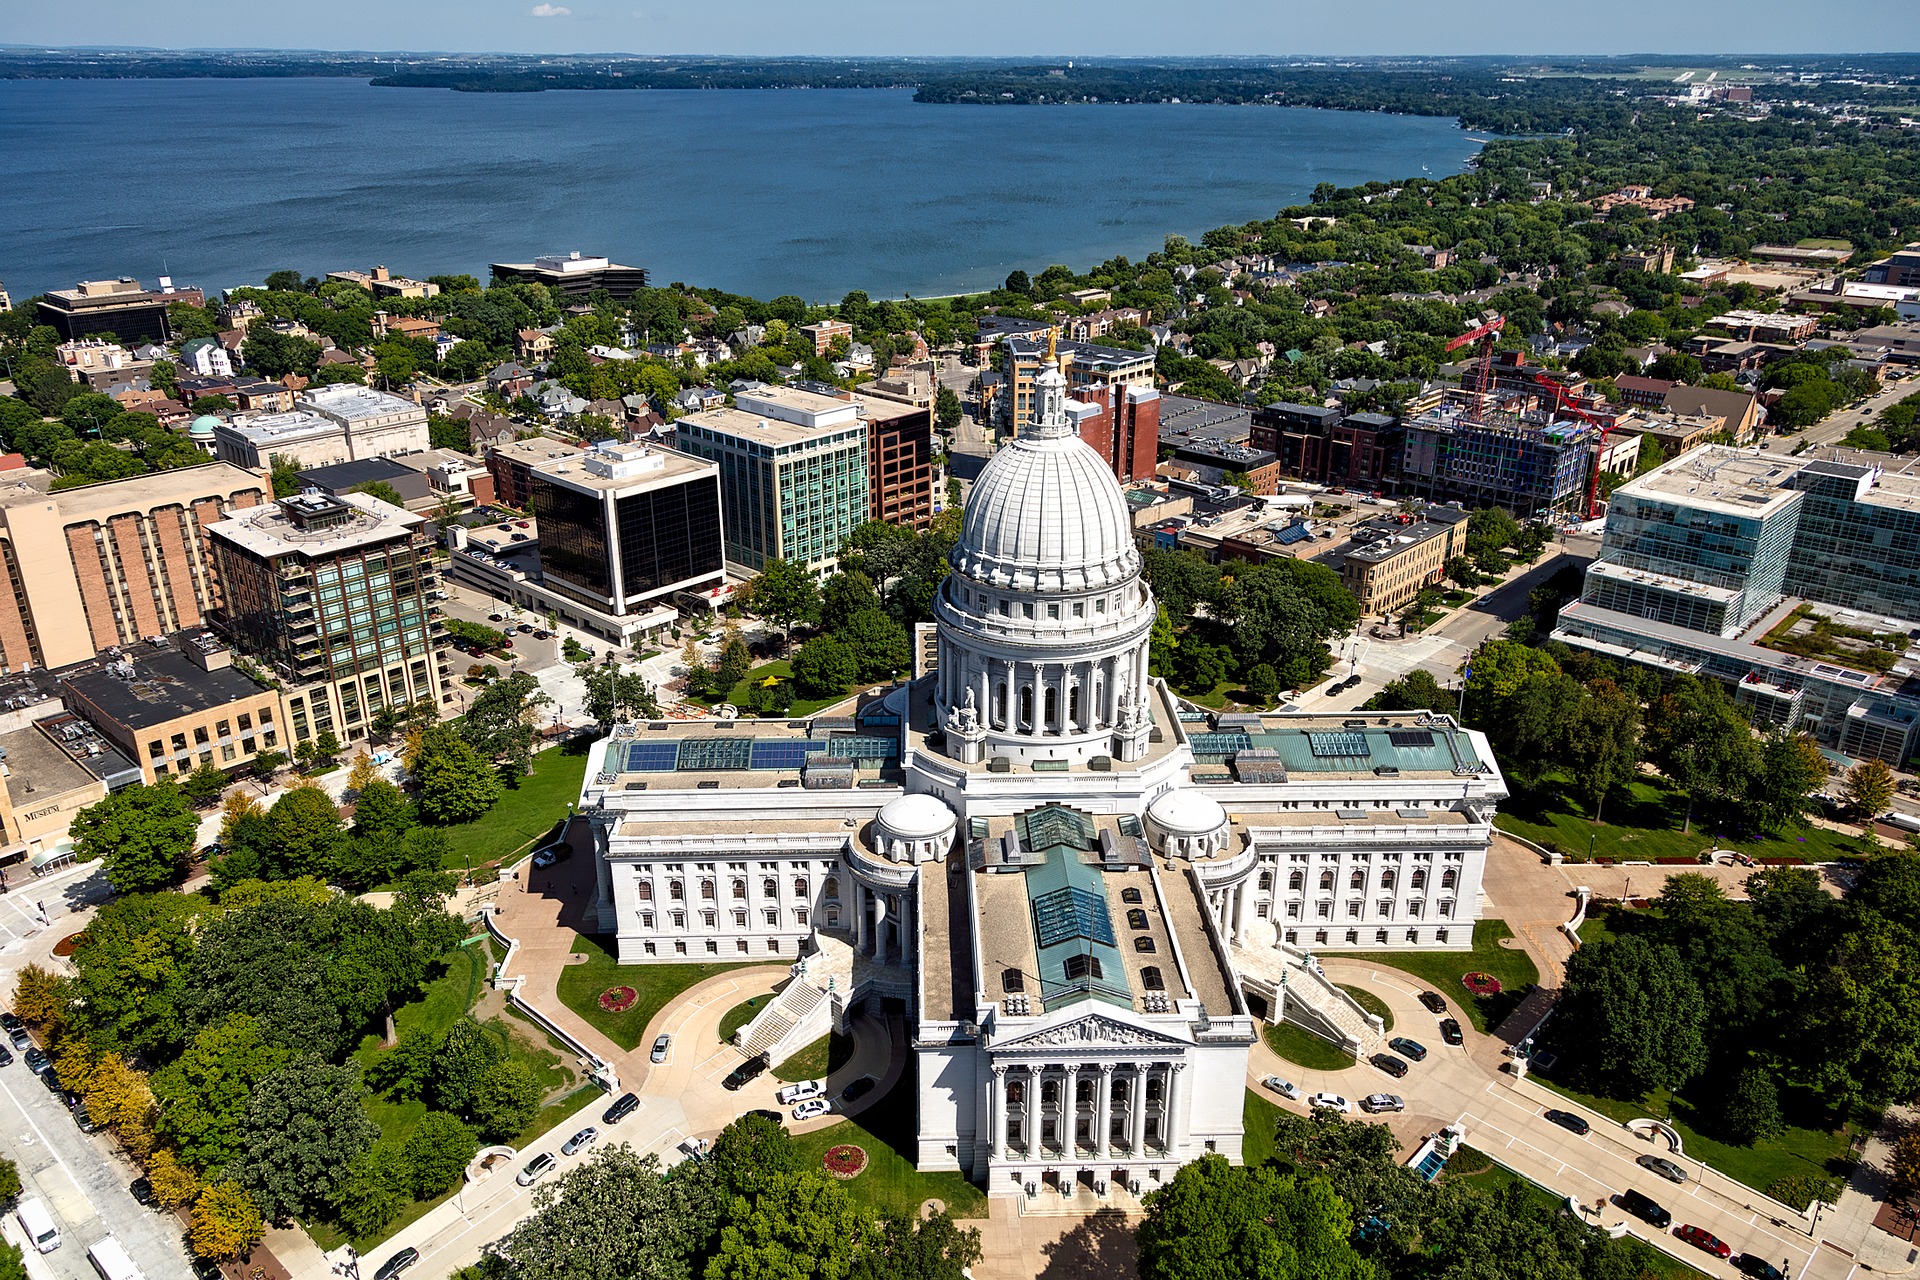 Workers Compensation in Wisconsin. State capitol from air. Why To Choose JLO?